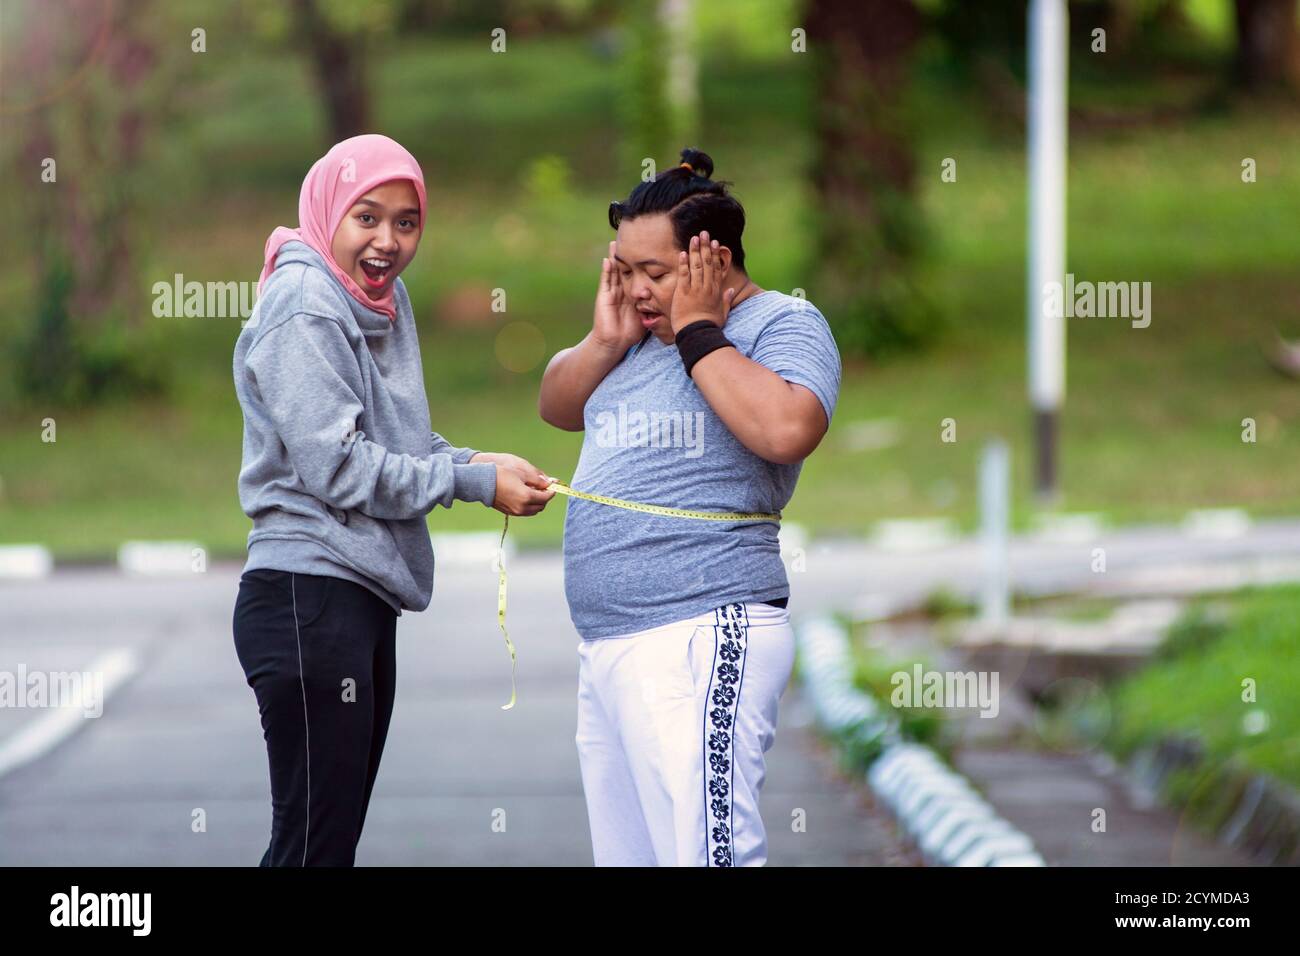 two-people-muslim-woman-and-fat-man-proportional-and-over-weight-comparing-themselves-by-measure-the-circumference-of-the-stomach-body-with-a-met-2CYMDA3.jpg